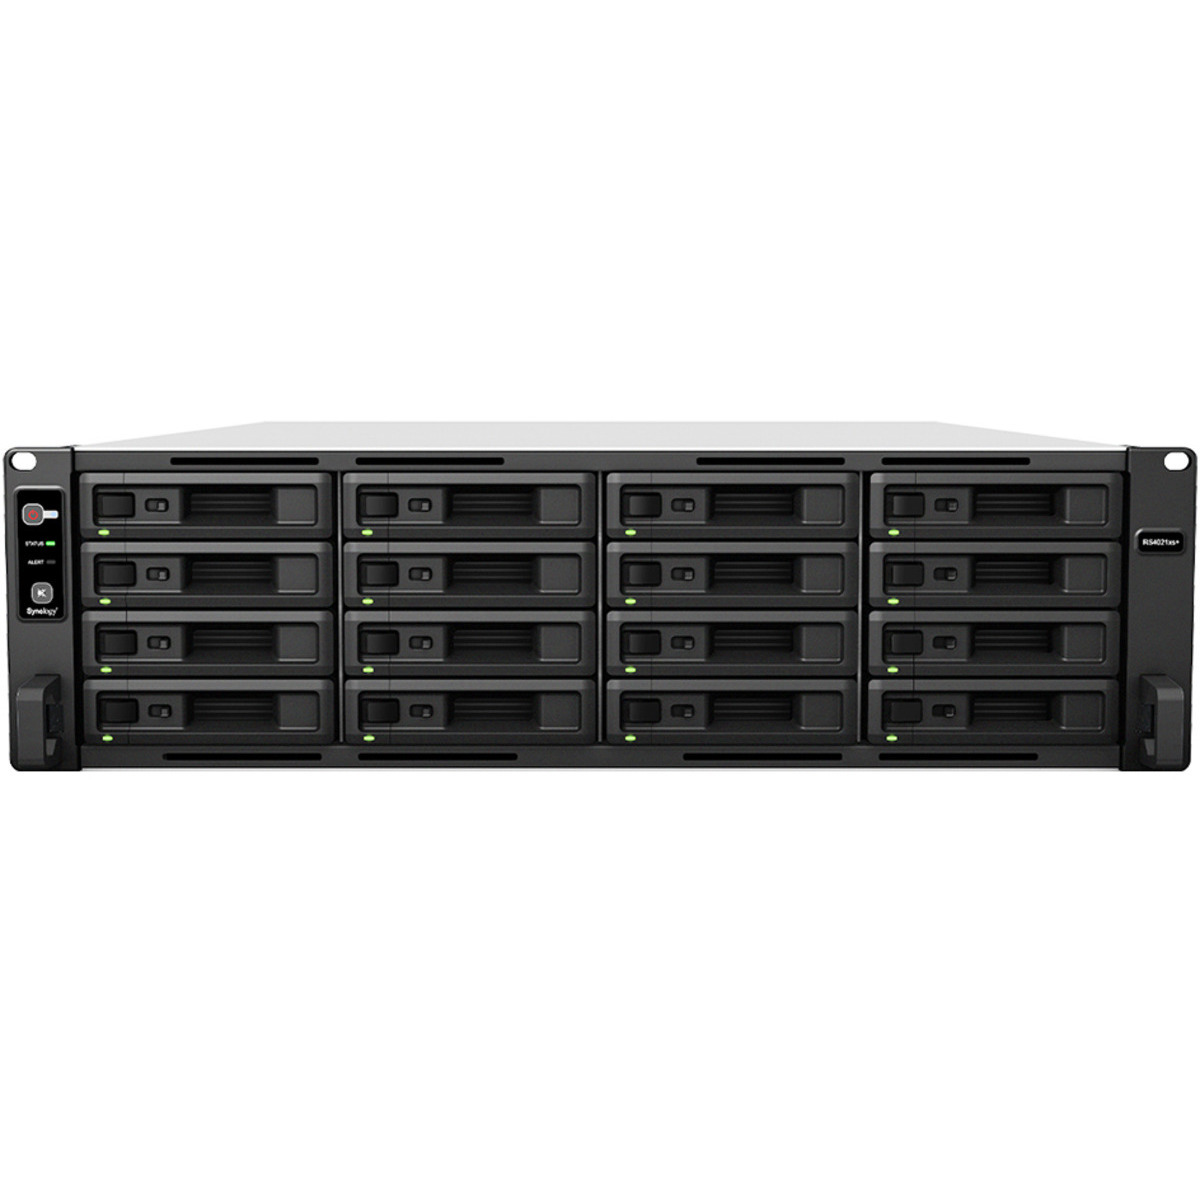 Synology RackStation RS4021xs+ 13tb 16-Bay RackMount Large Business / Enterprise NAS - Network Attached Storage Device 13x1tb Sandisk Ultra 3D SDSSDH3-1T00 2.5 560/520MB/s SATA 6Gb/s SSD CONSUMER Class Drives Installed - Burn-In Tested RackStation RS4021xs+